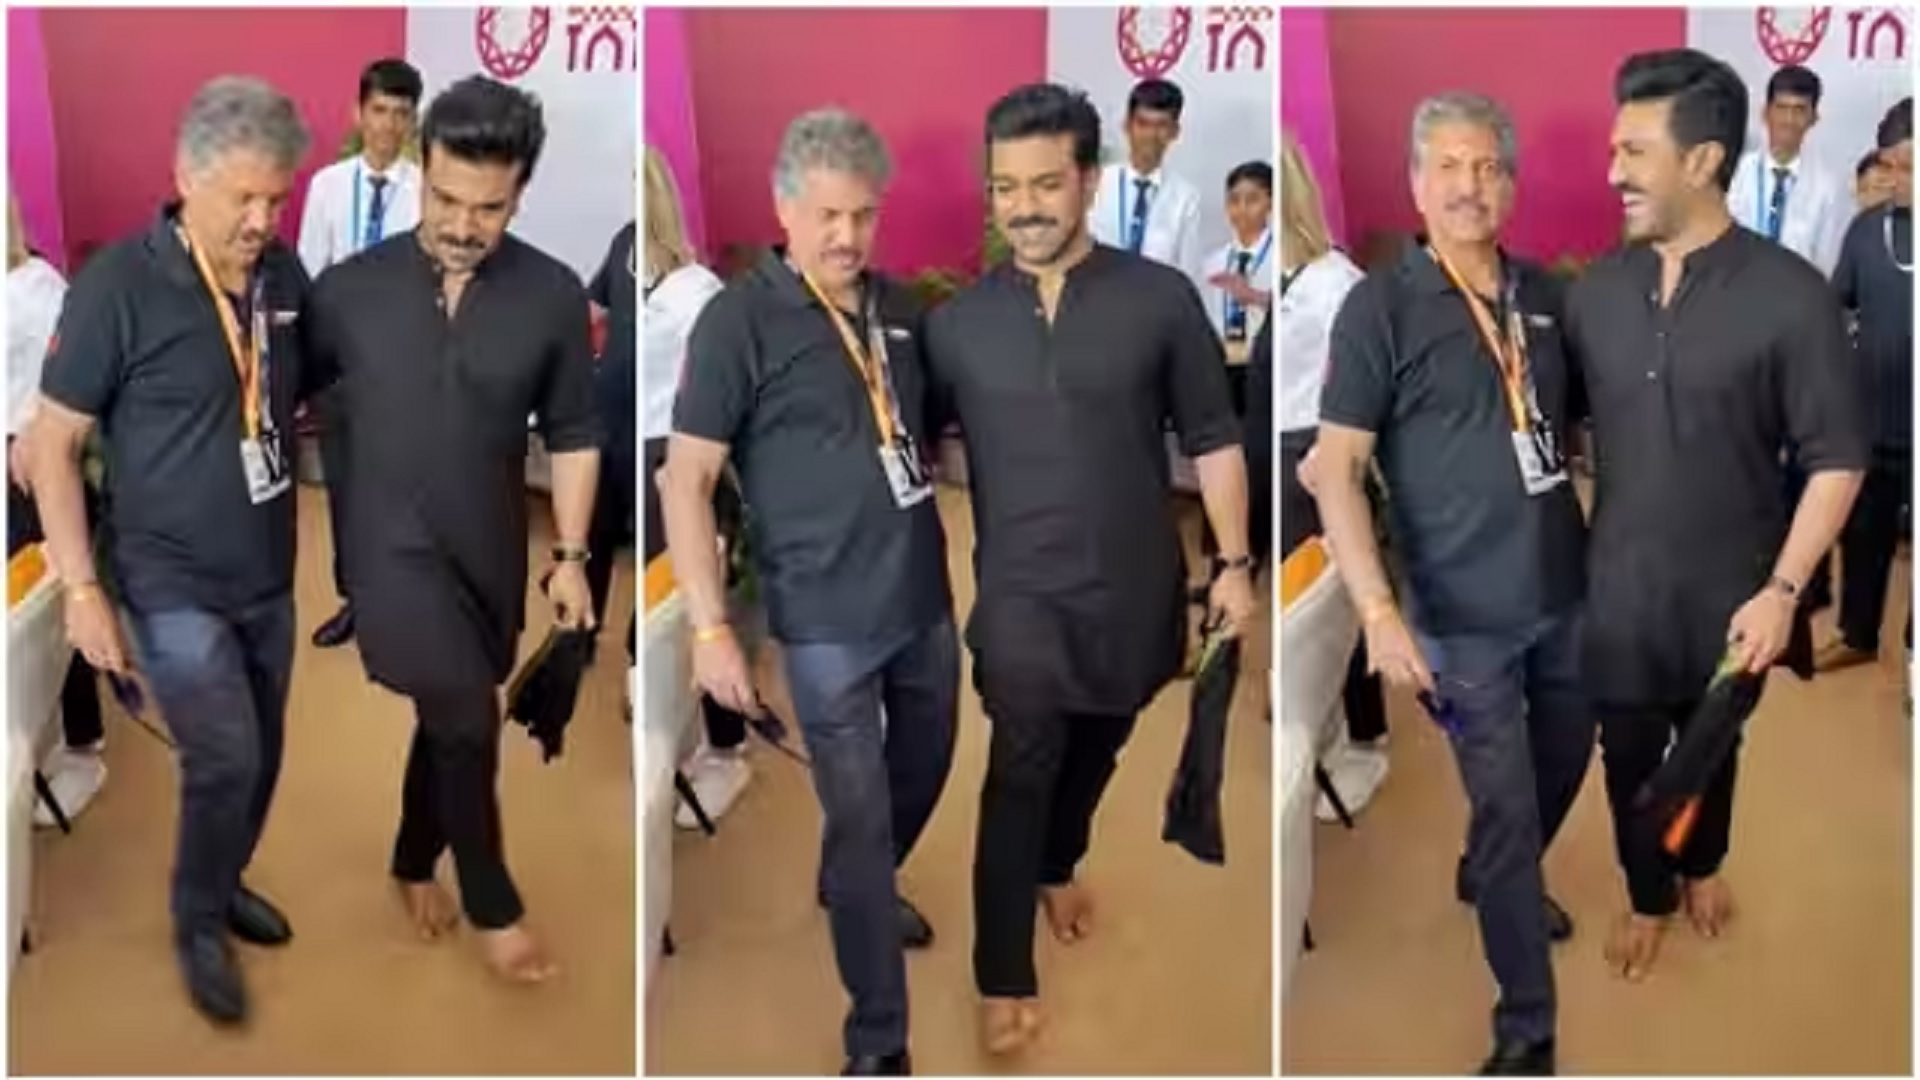 Anand Mahindra Dances With Ram Charan & Learns Famous ‘Naatu Naatu’ Step From The Actor [Video]